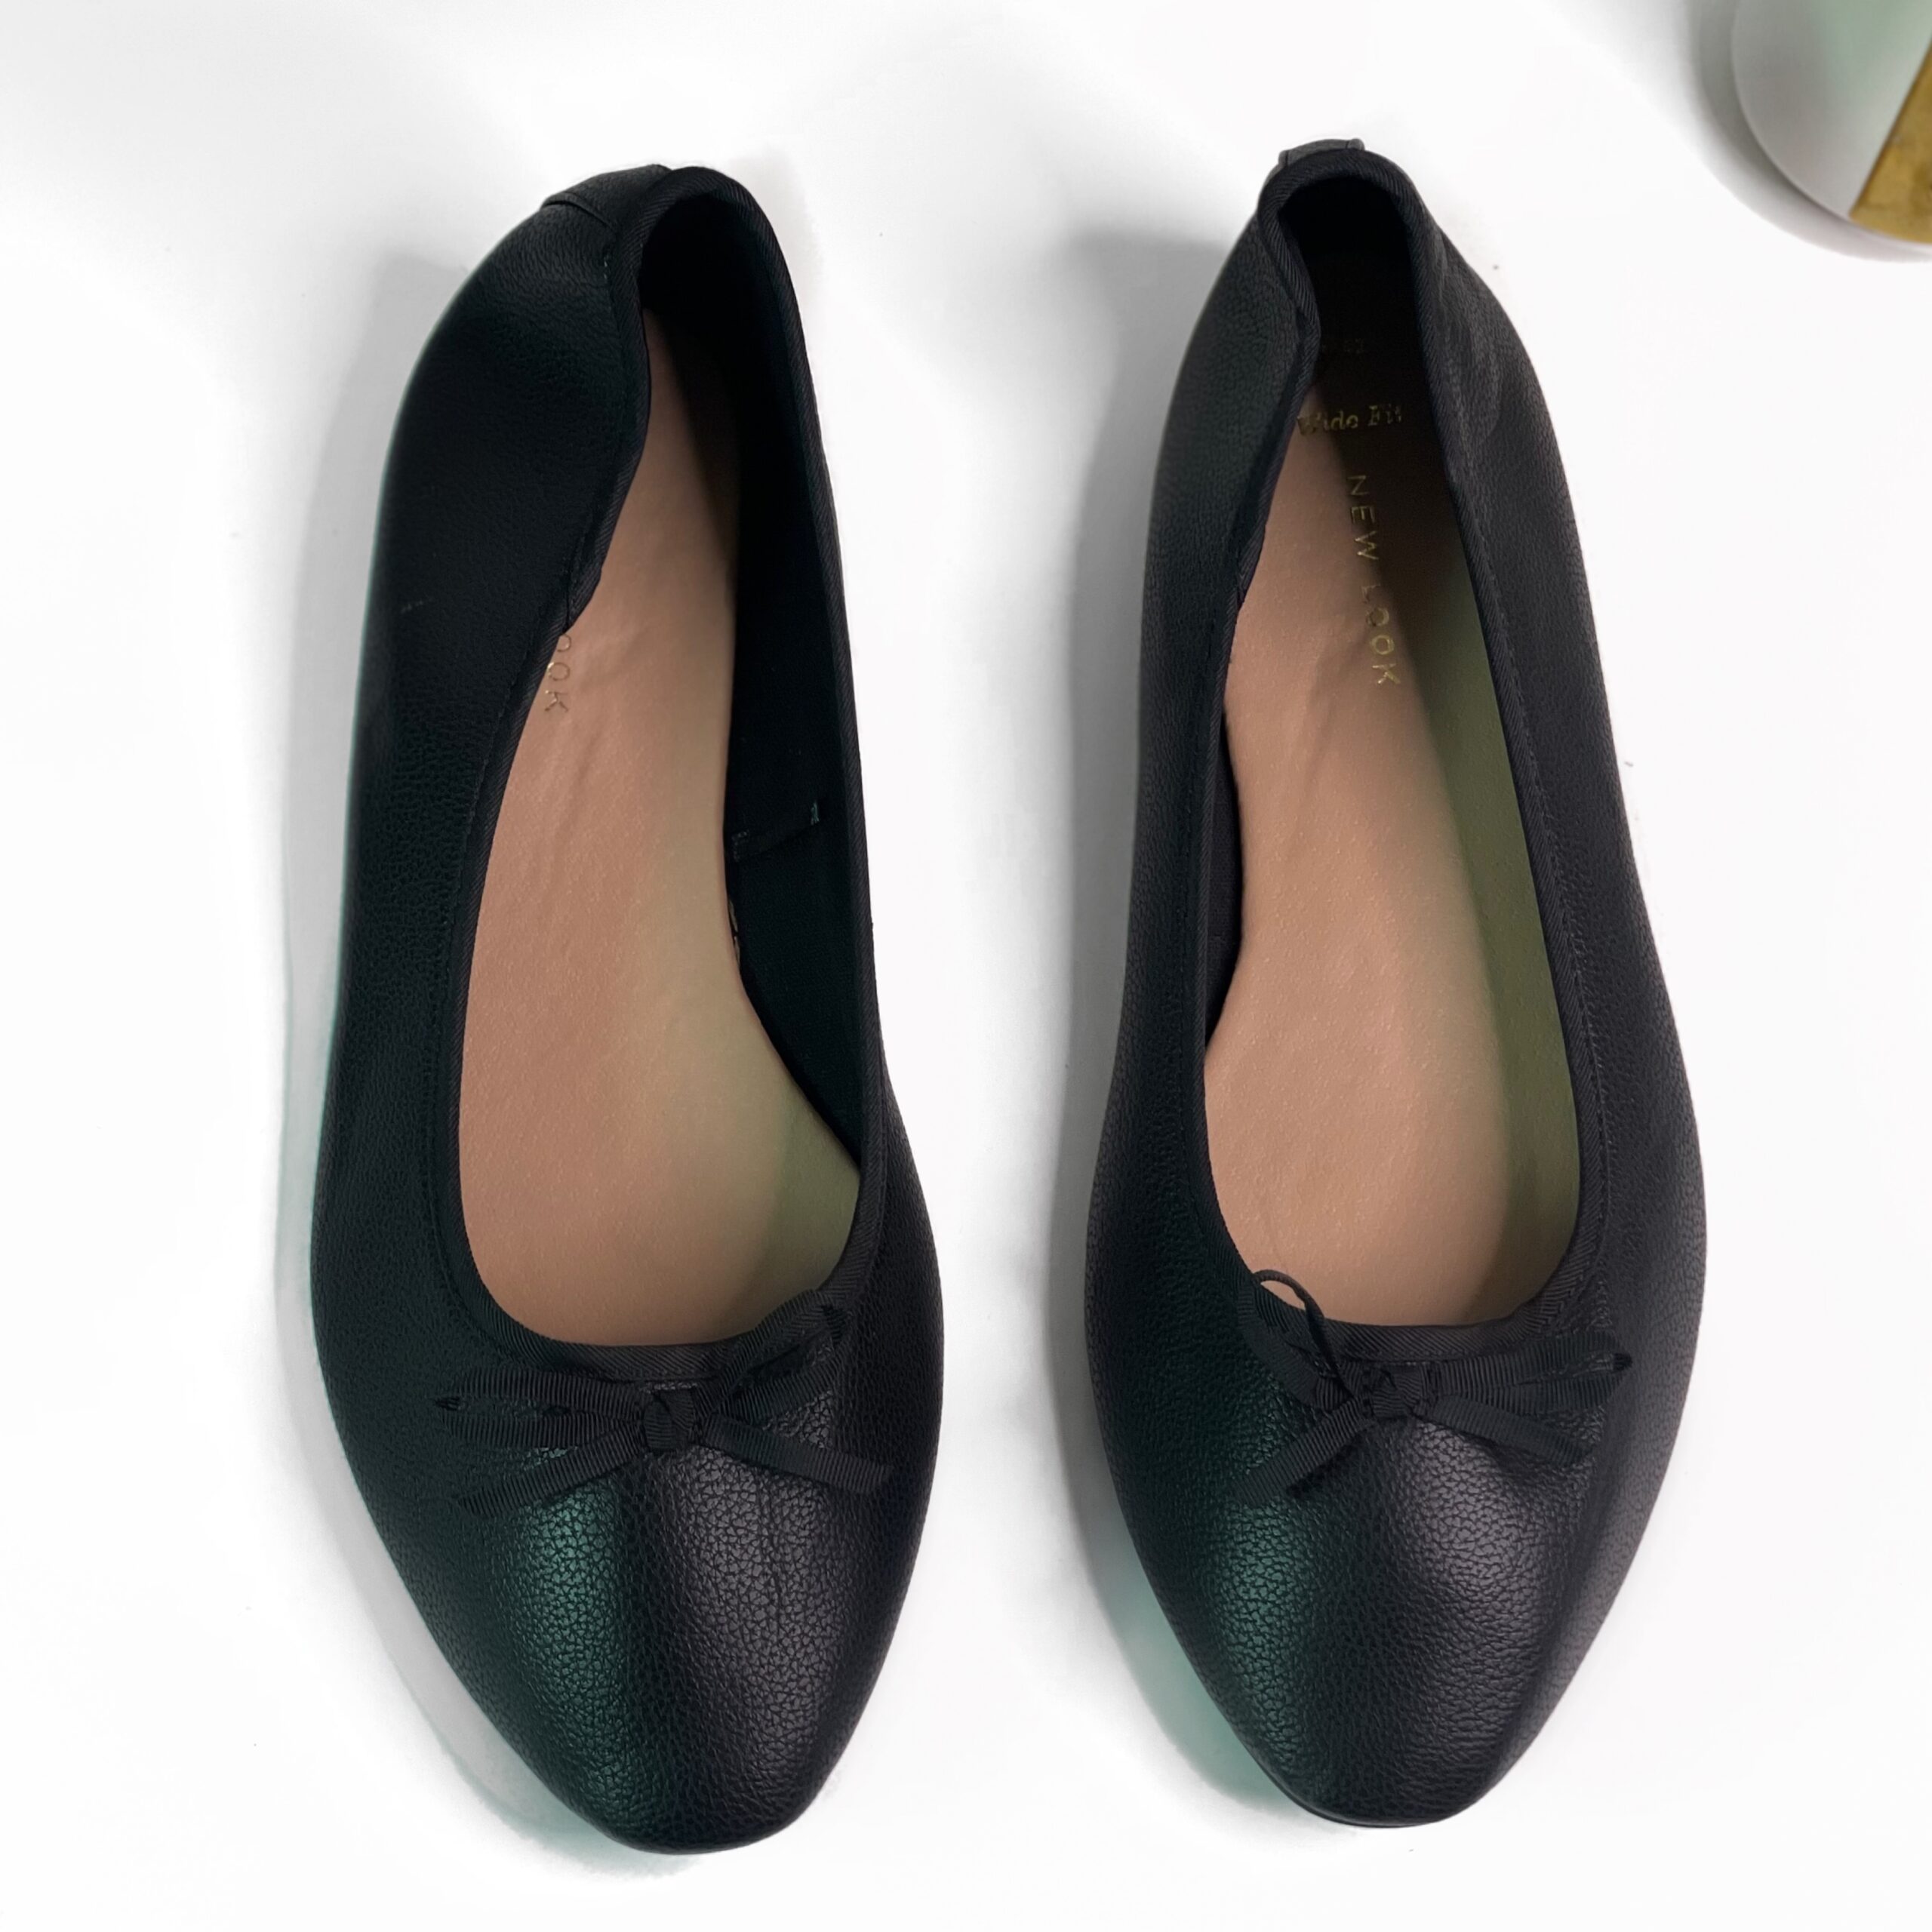 newlook Black flats in 42 wide fit suitable for standard 43 - Specta Store